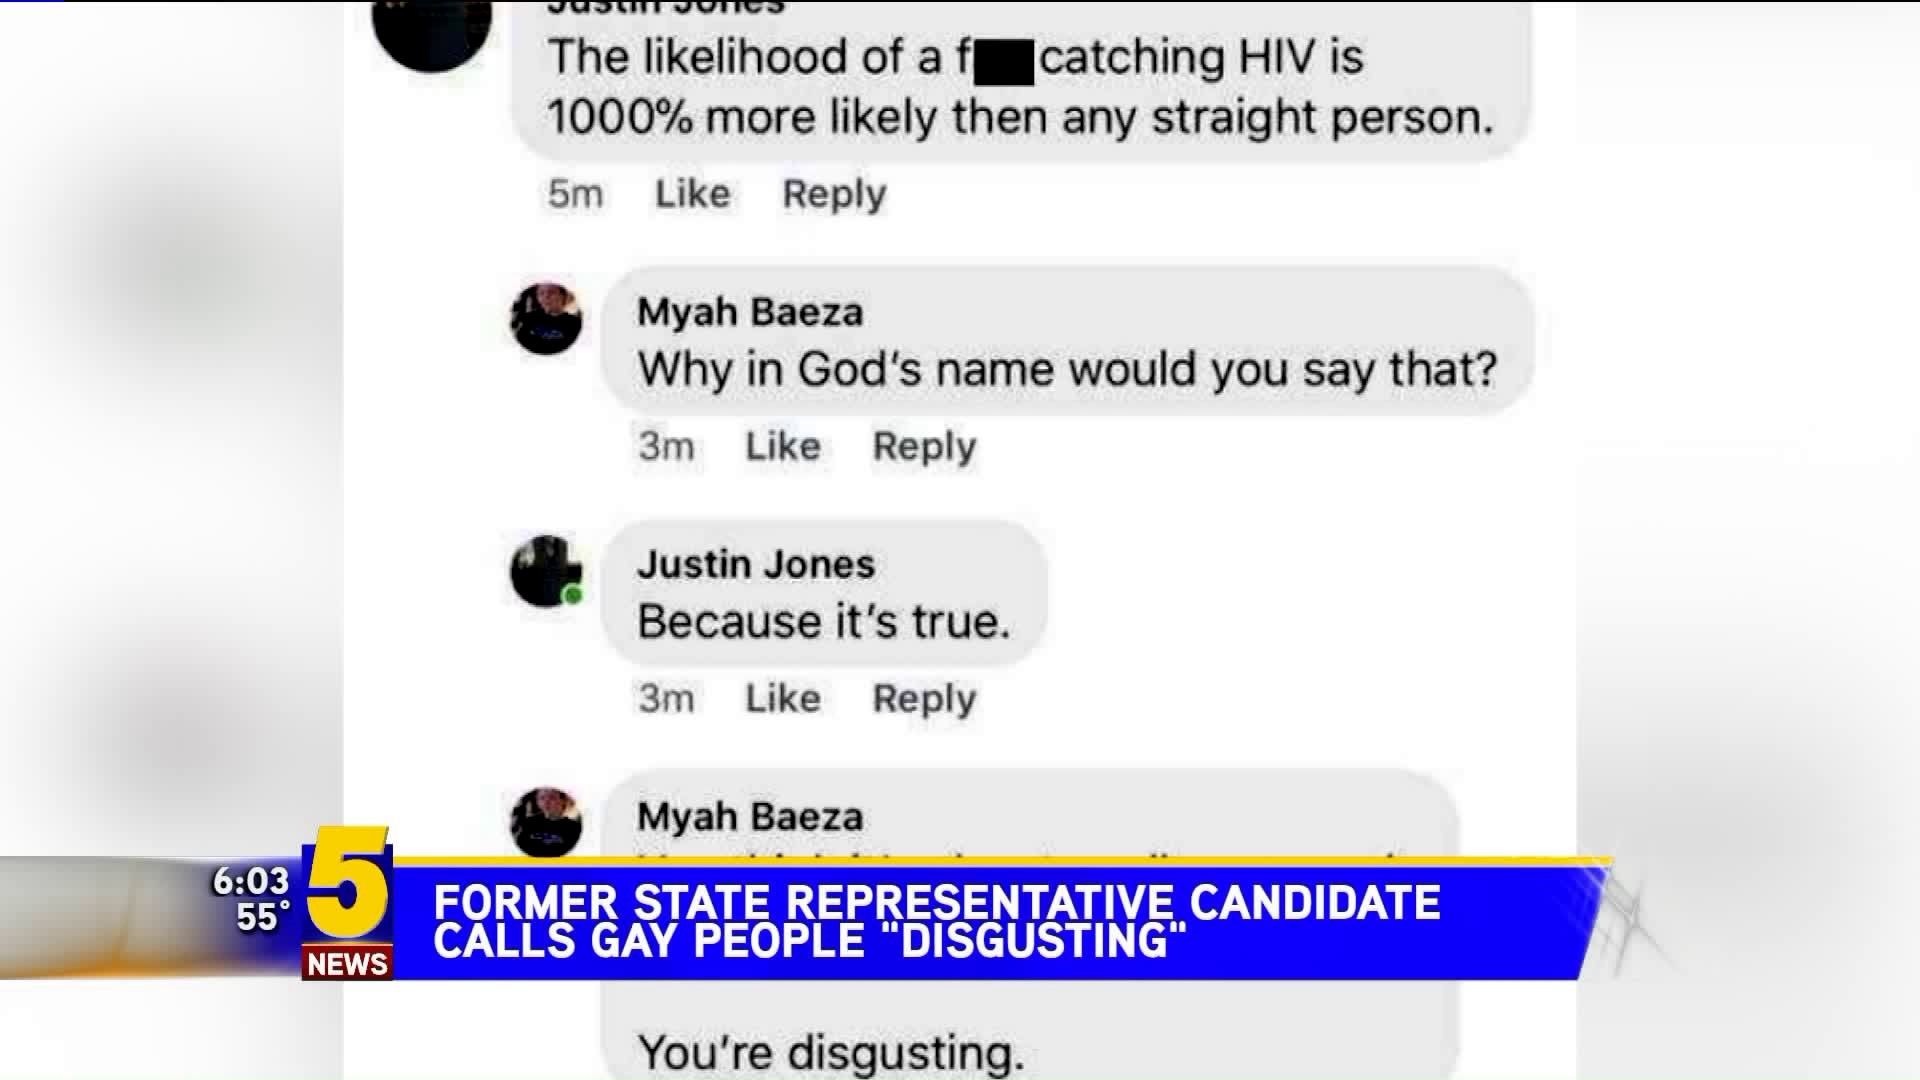 Former State Rep. Candidate Calls Gay People "Disgusting"